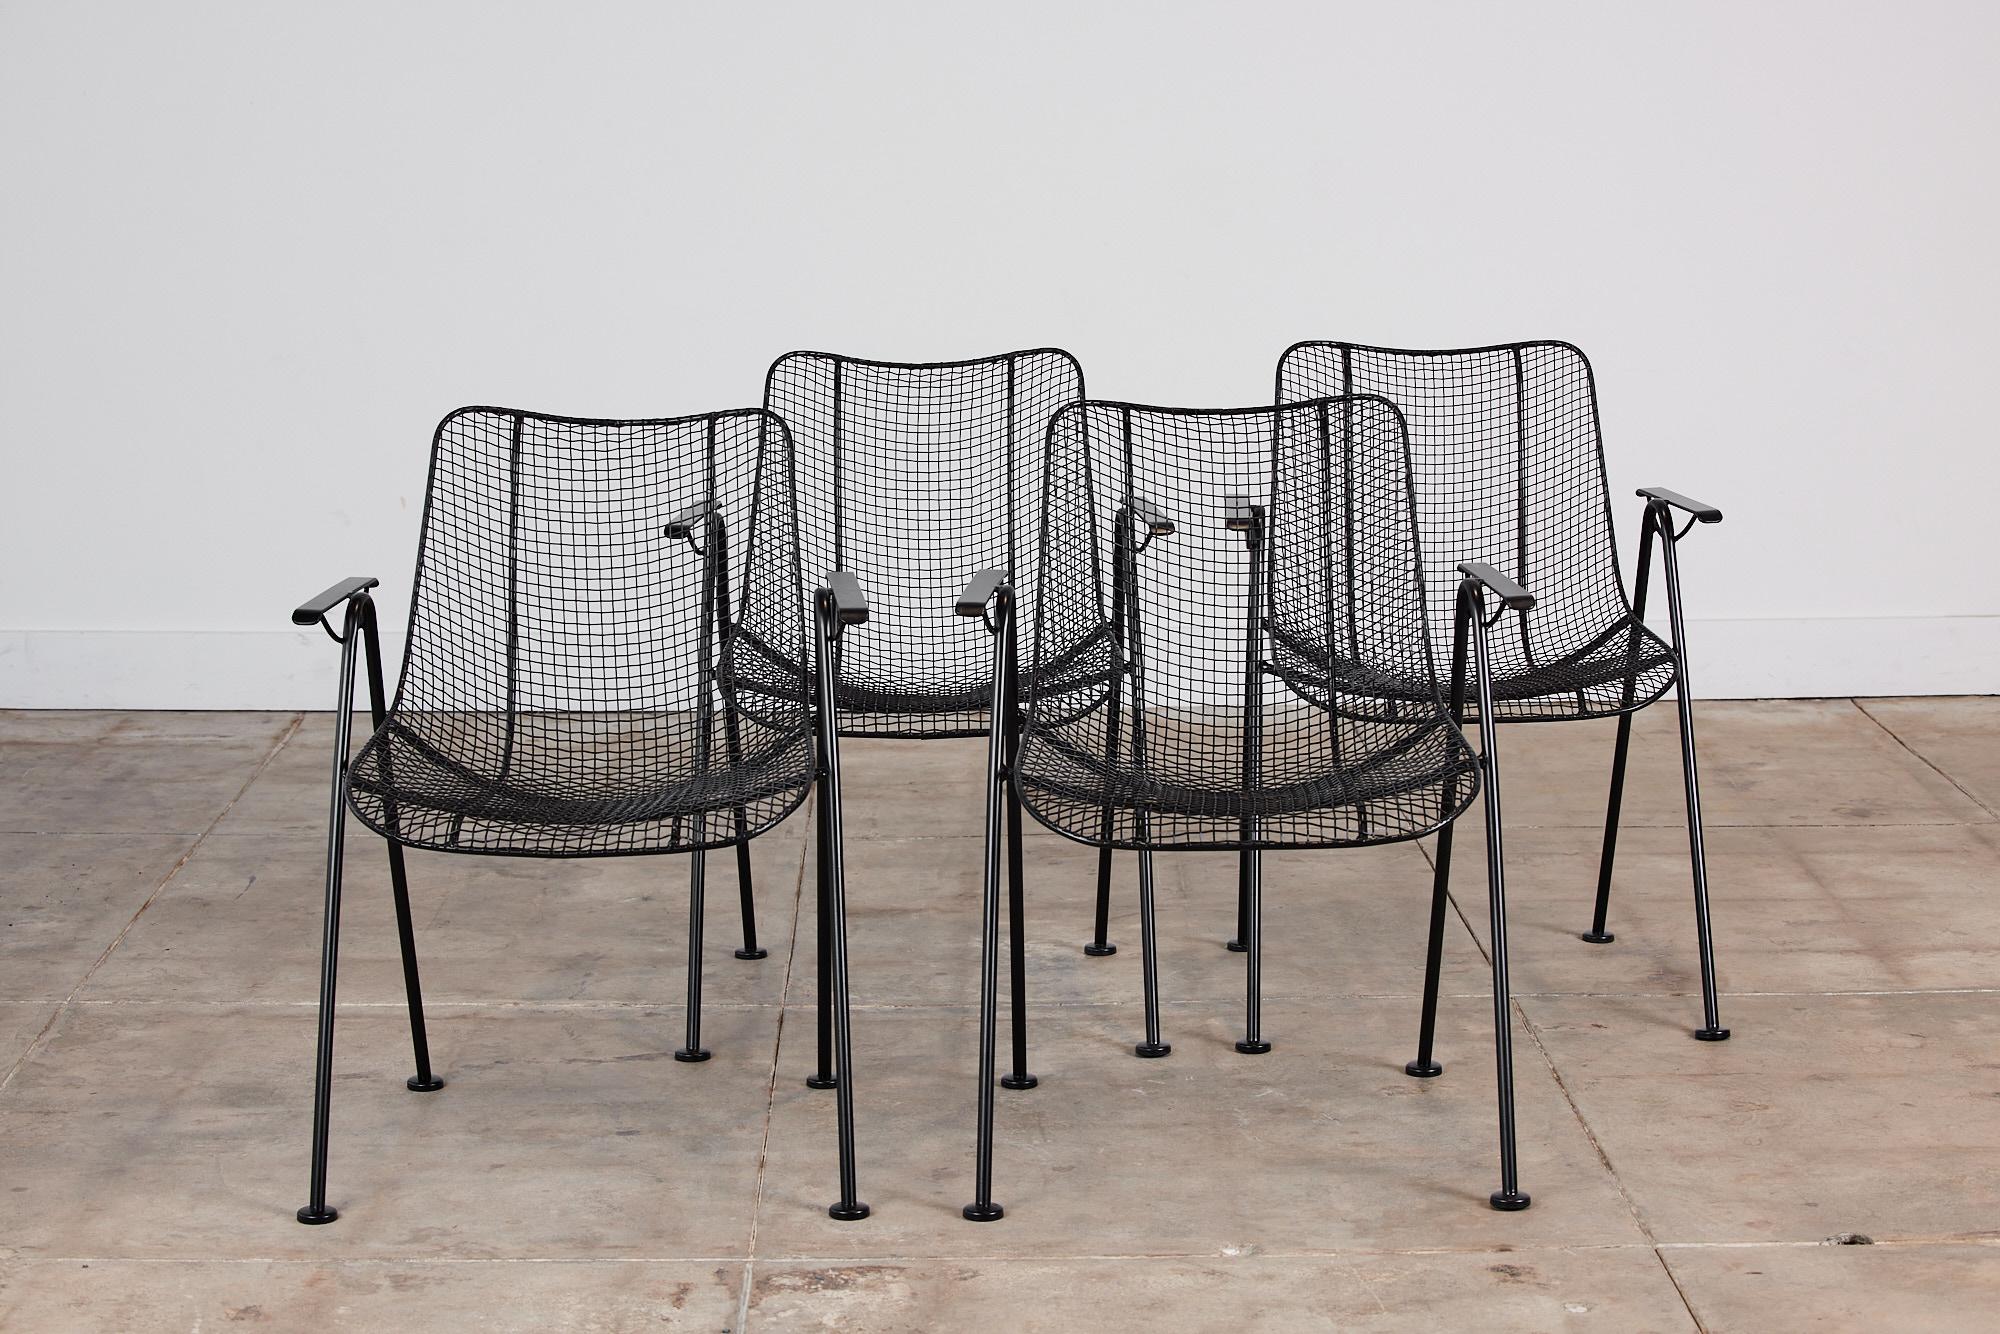 Set of four dining armchairs by Lee Woodard for Woodard Furniture, c.1950s, USA. The armchairs are from Woodard’s “Sculptura” line designed in 1956. Each chair has a molded mesh frame that sits atop four wrought iron legs with disc feet. The chairs